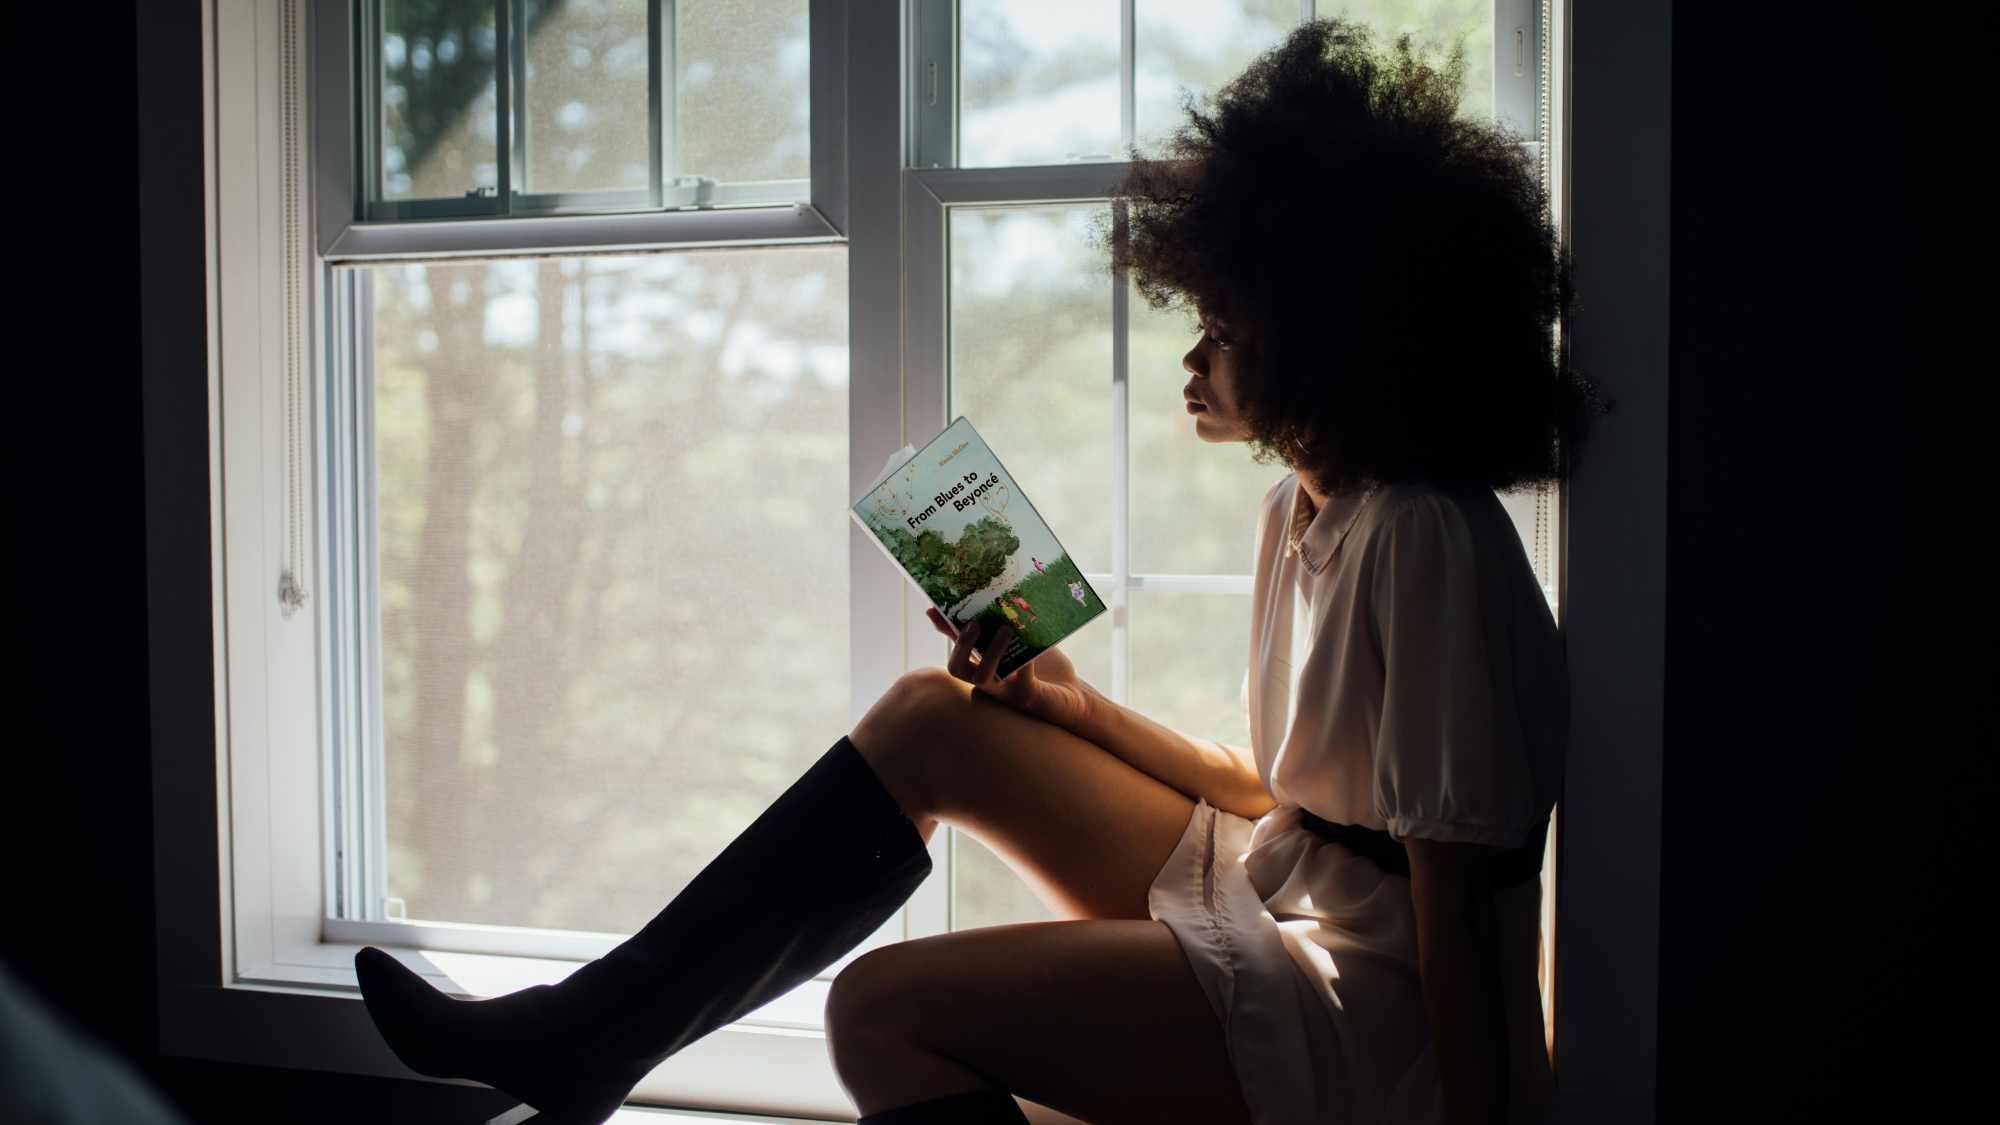 A girl reading a book by the window